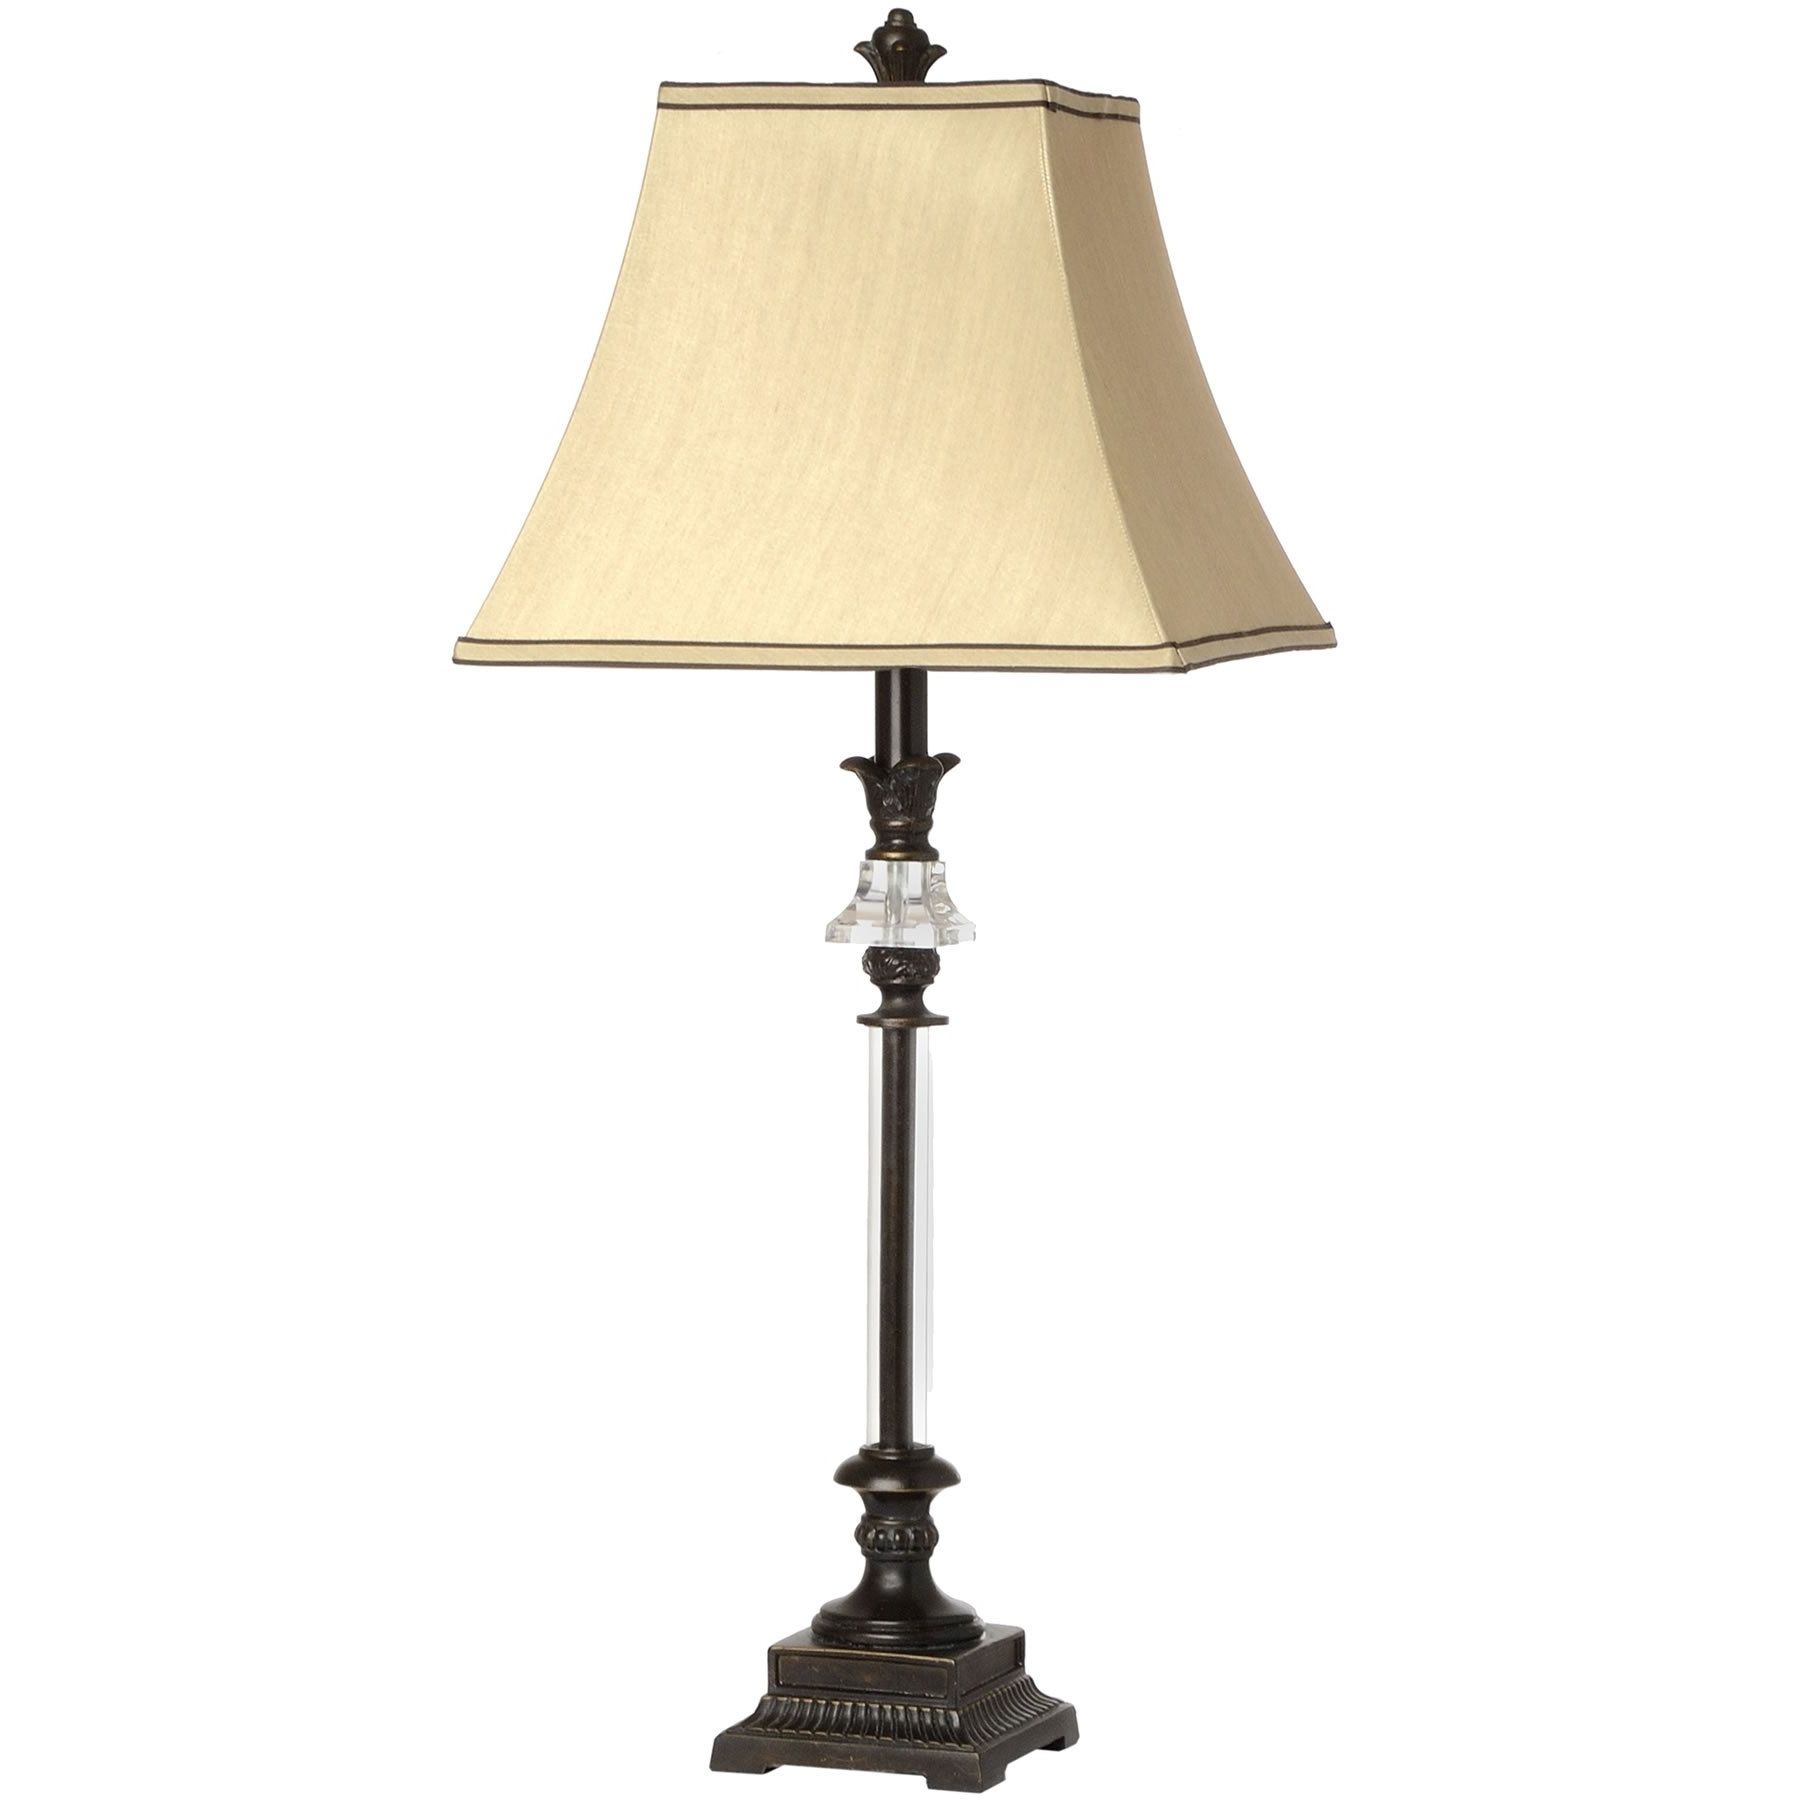 Preferred Traditional Table Lamps For Living Room Inside Traditional Table Lamps For Living Room Lamp Shade, Classic Table (View 6 of 20)